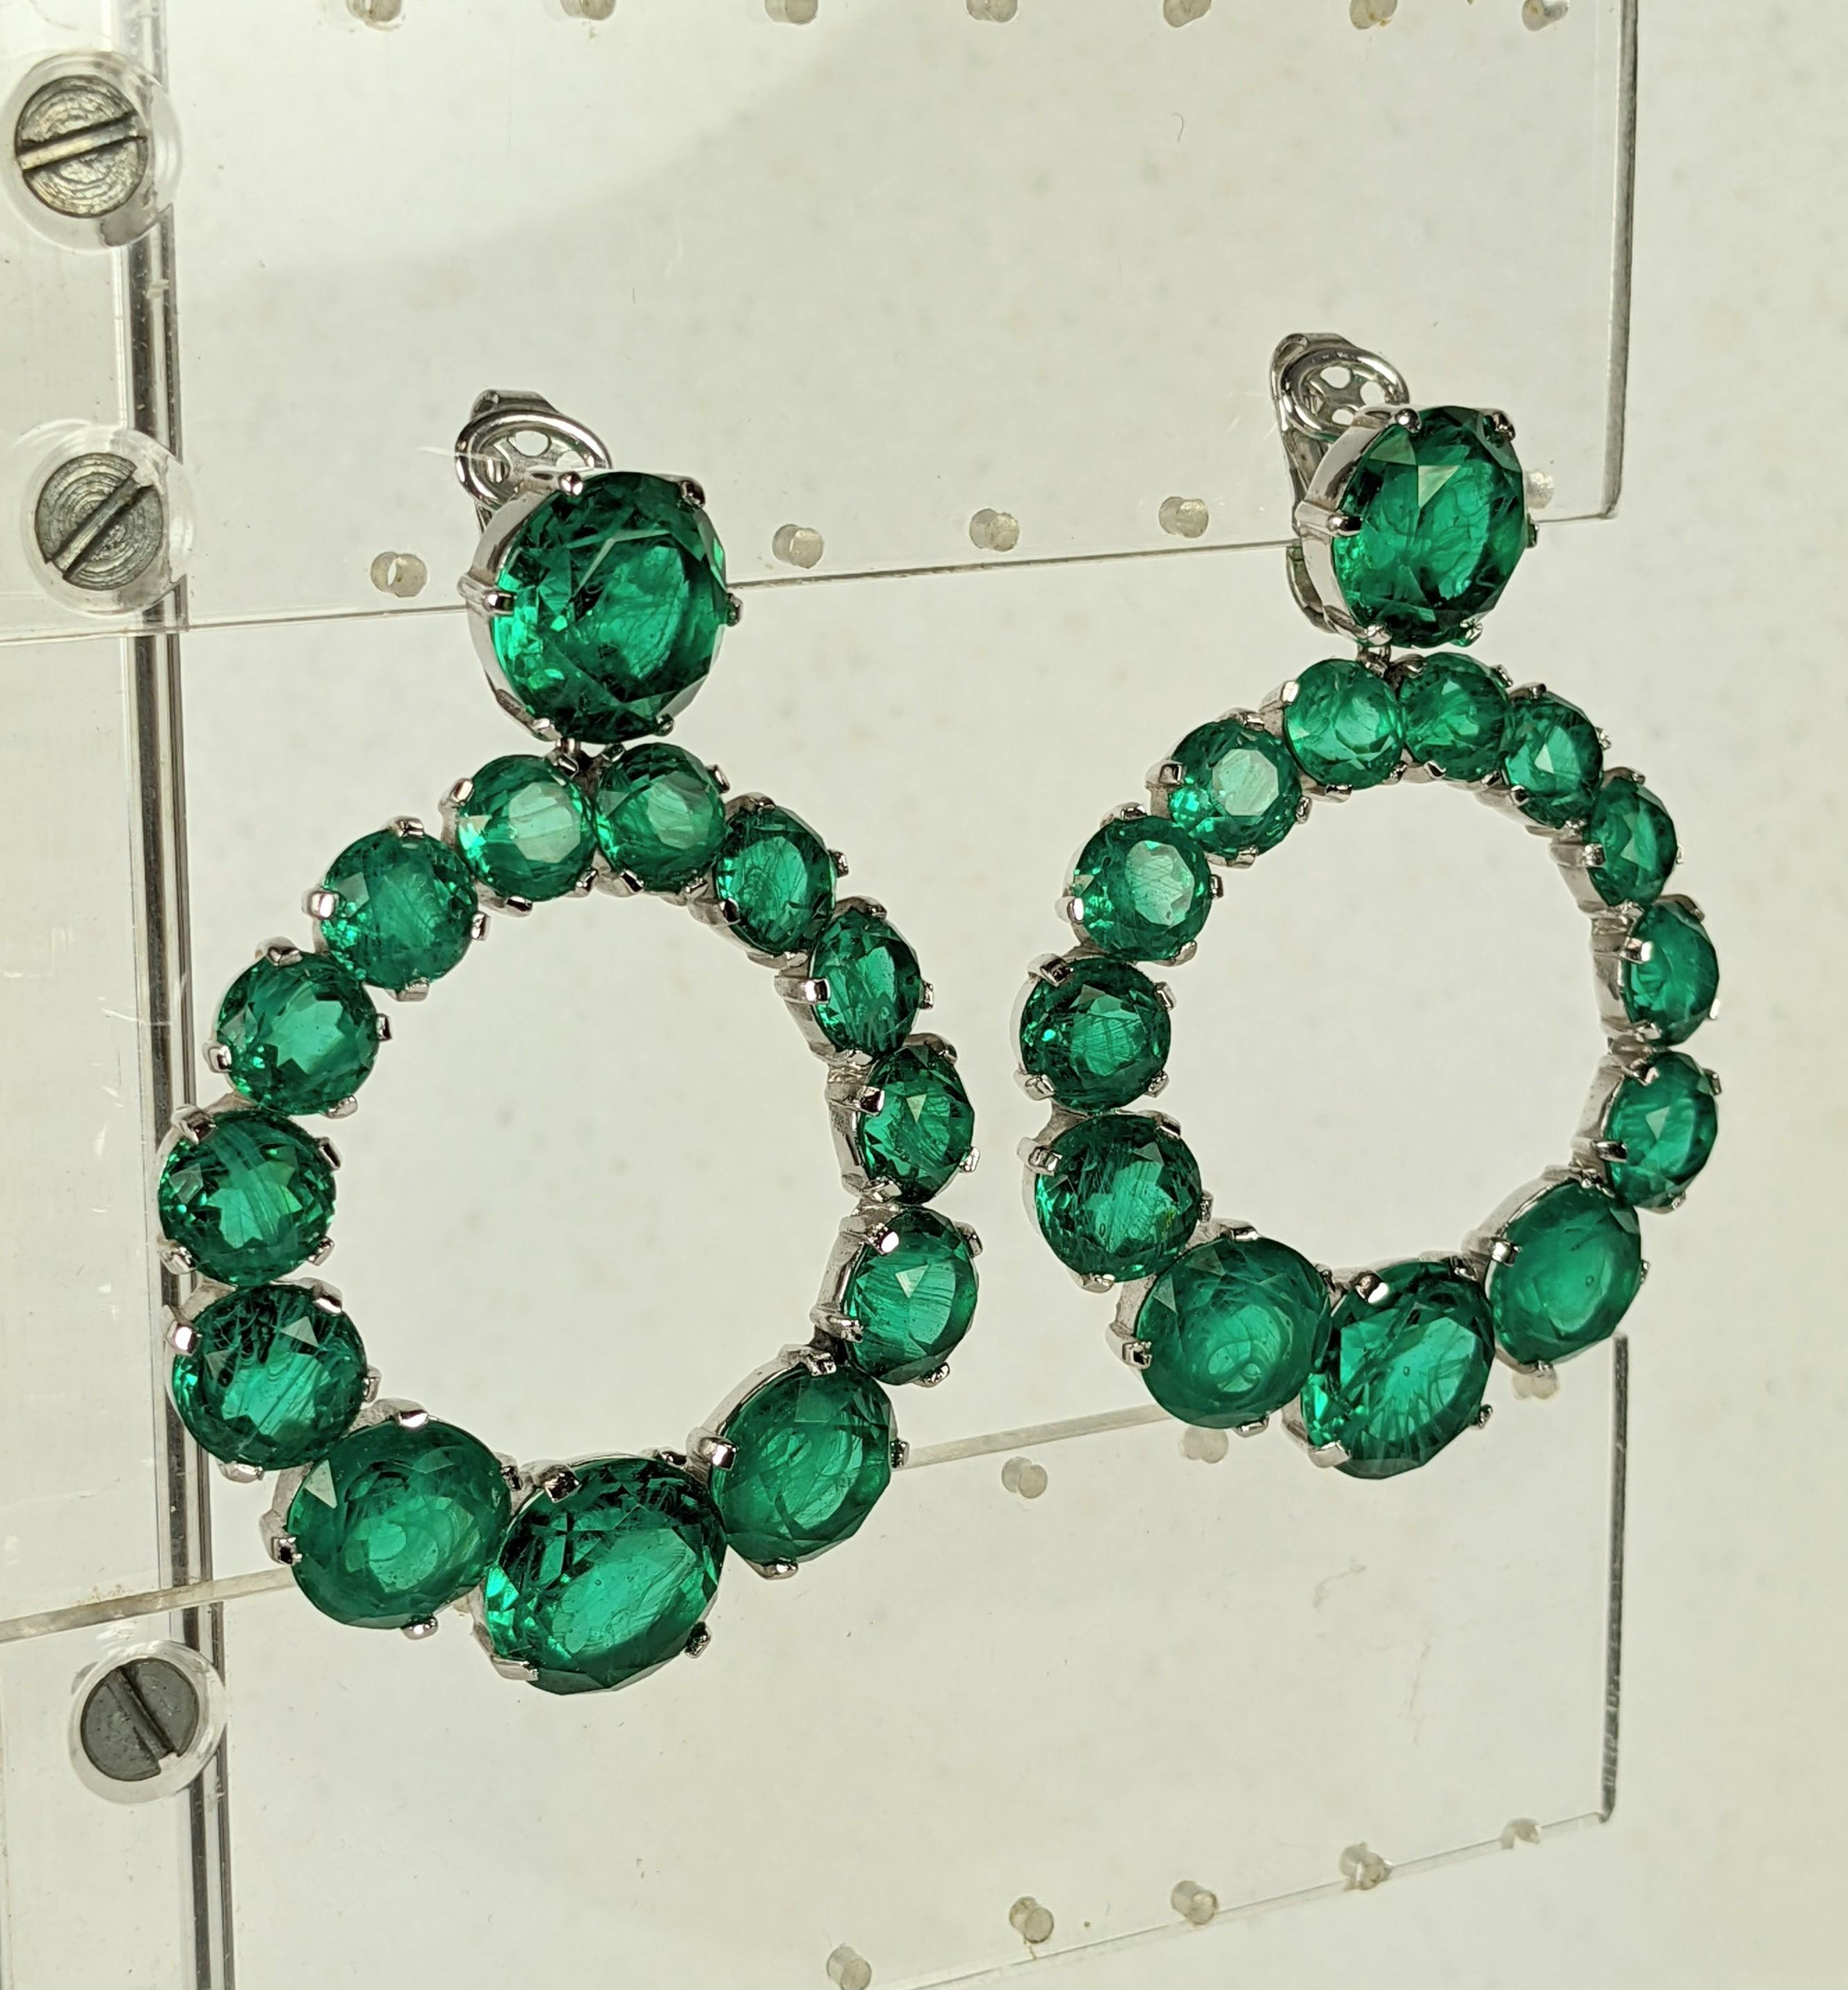 Certified Jade Jewelry with a traditional twist